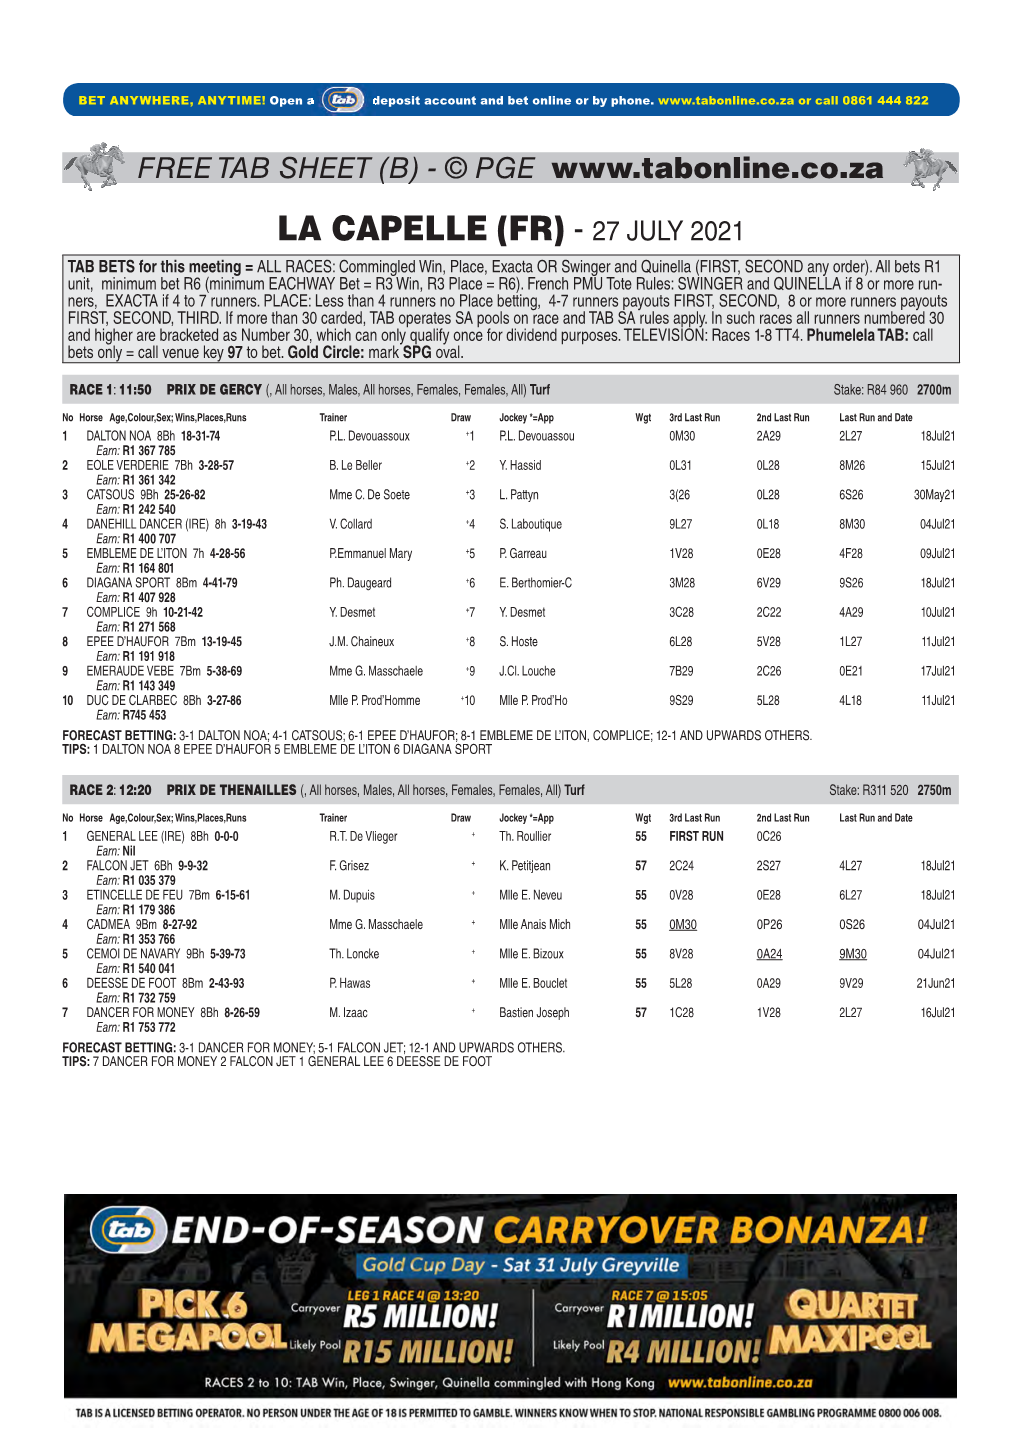 LA CAPELLE (FR) - 27 JULY 2021 TAB BETS for This Meeting = ALL RACES: Commingled Win, Place, Exacta OR Swinger and Quinella (FIRST, SECOND Any Order)